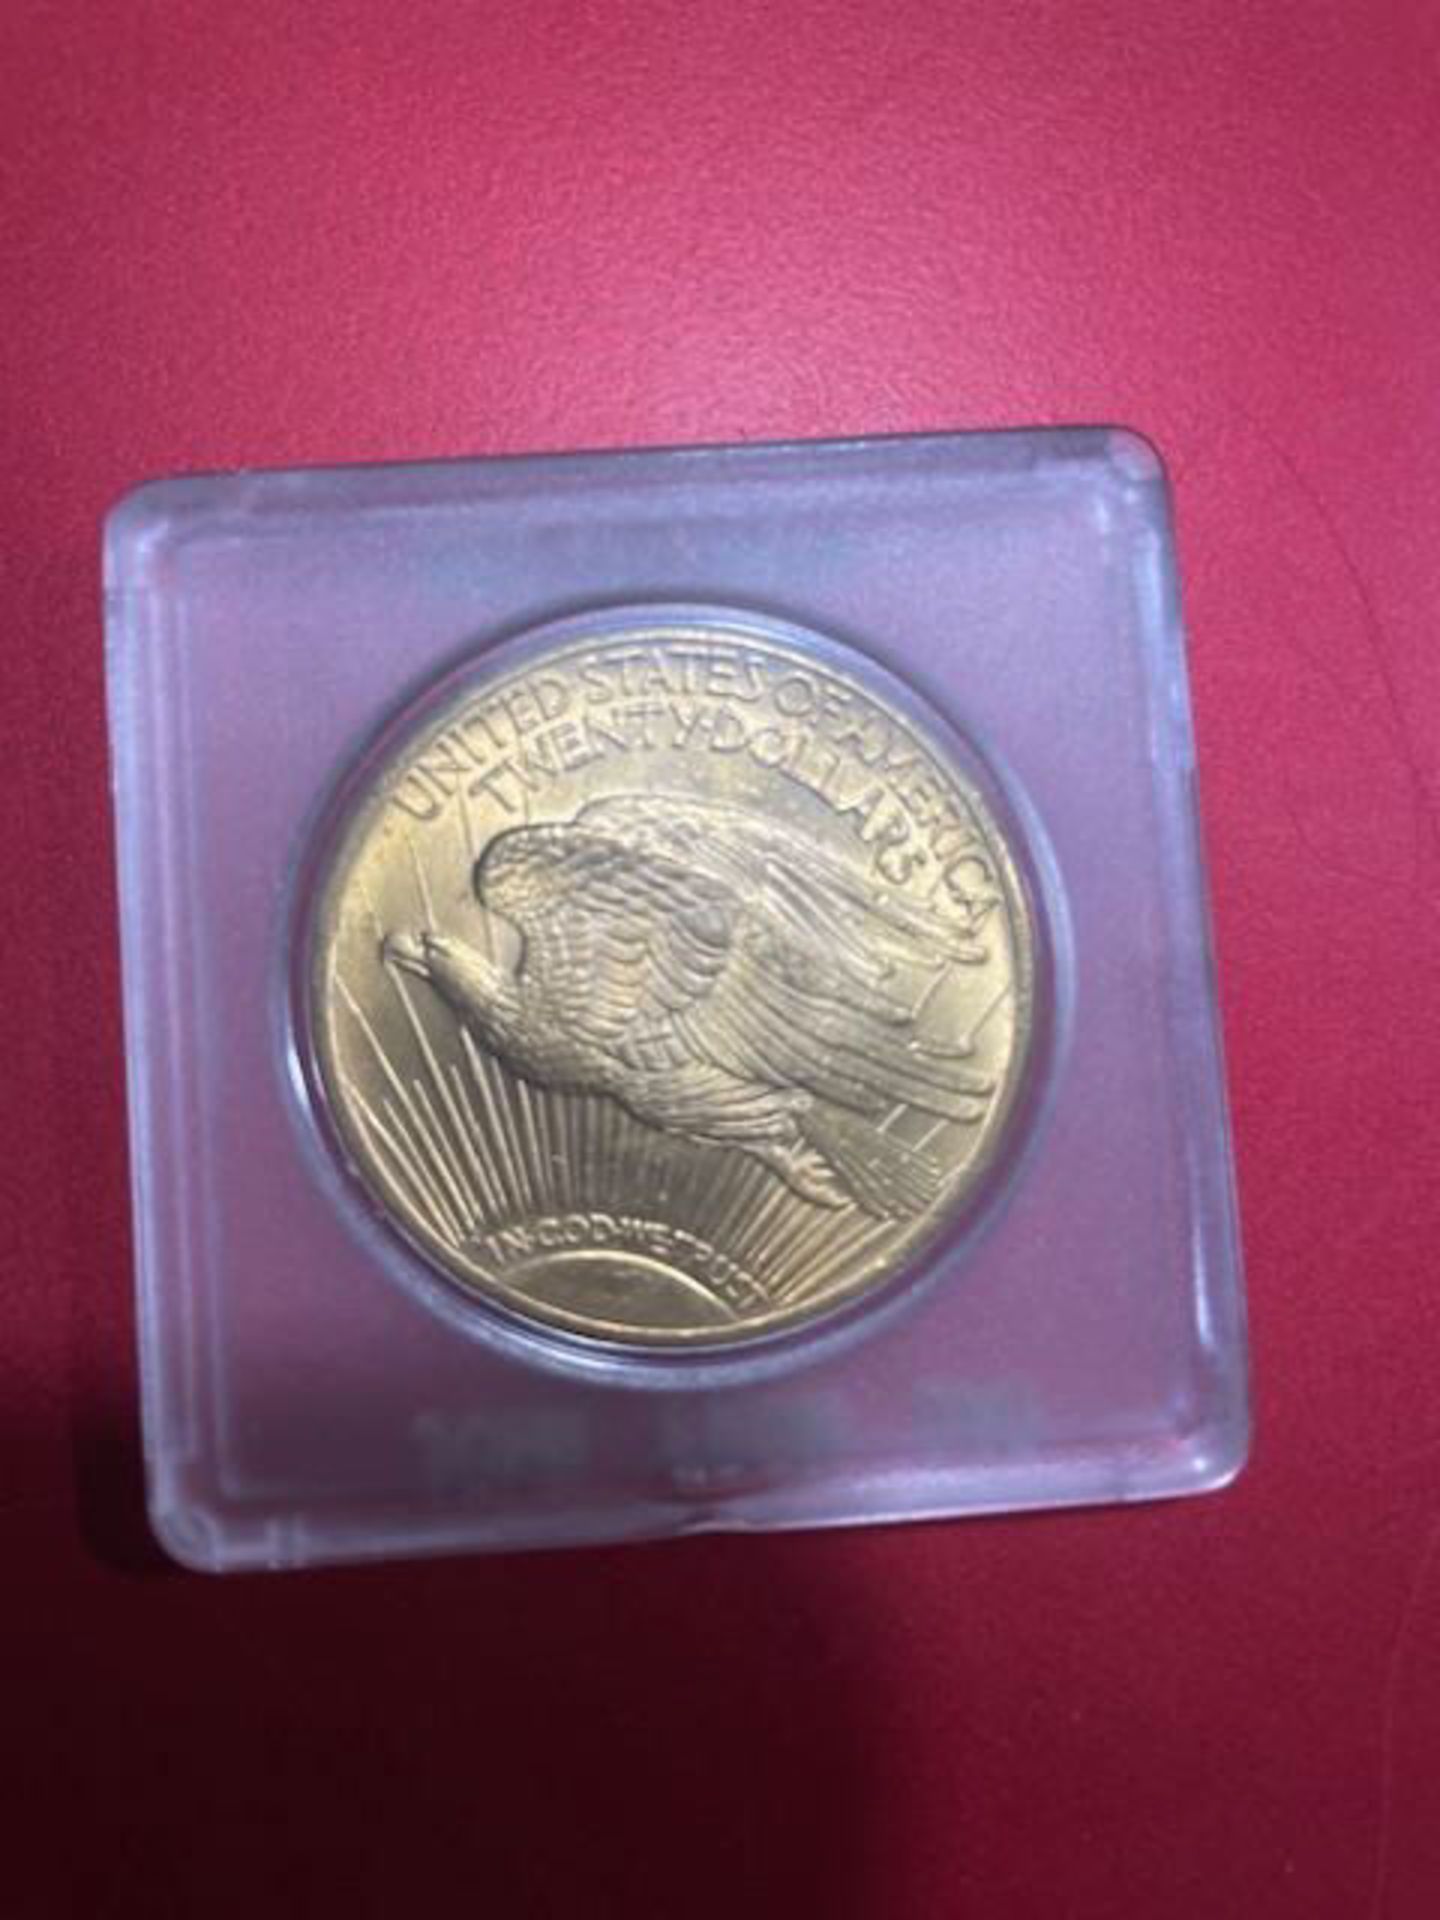 1928 St. Gaudens Double Eagle $20 Gold Coin - Image 9 of 12